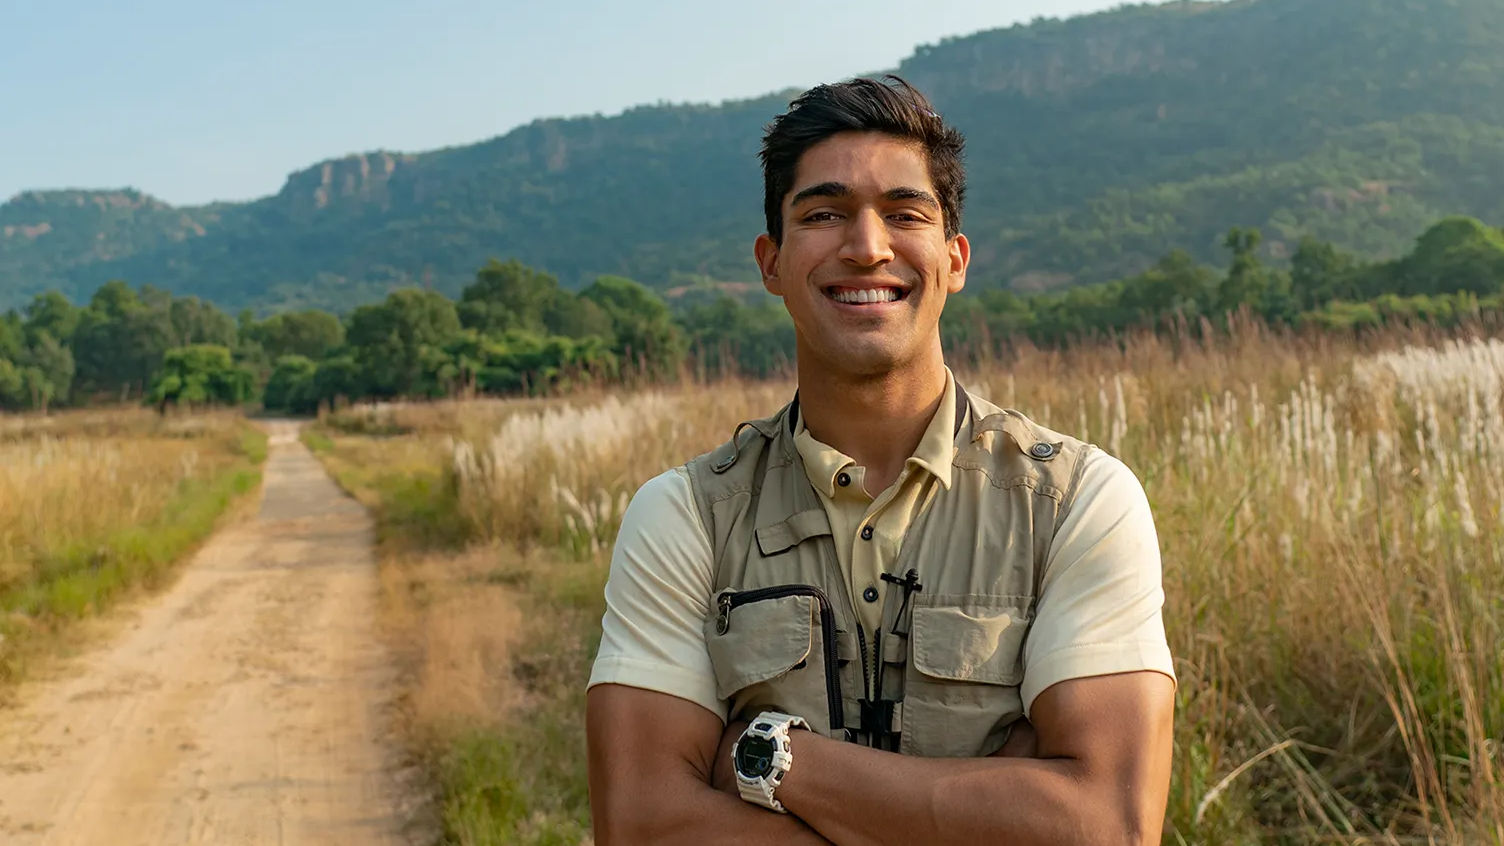 Meet Suyash Keshari, a 25-year old filmmaker who quit his job in US to save wildlife